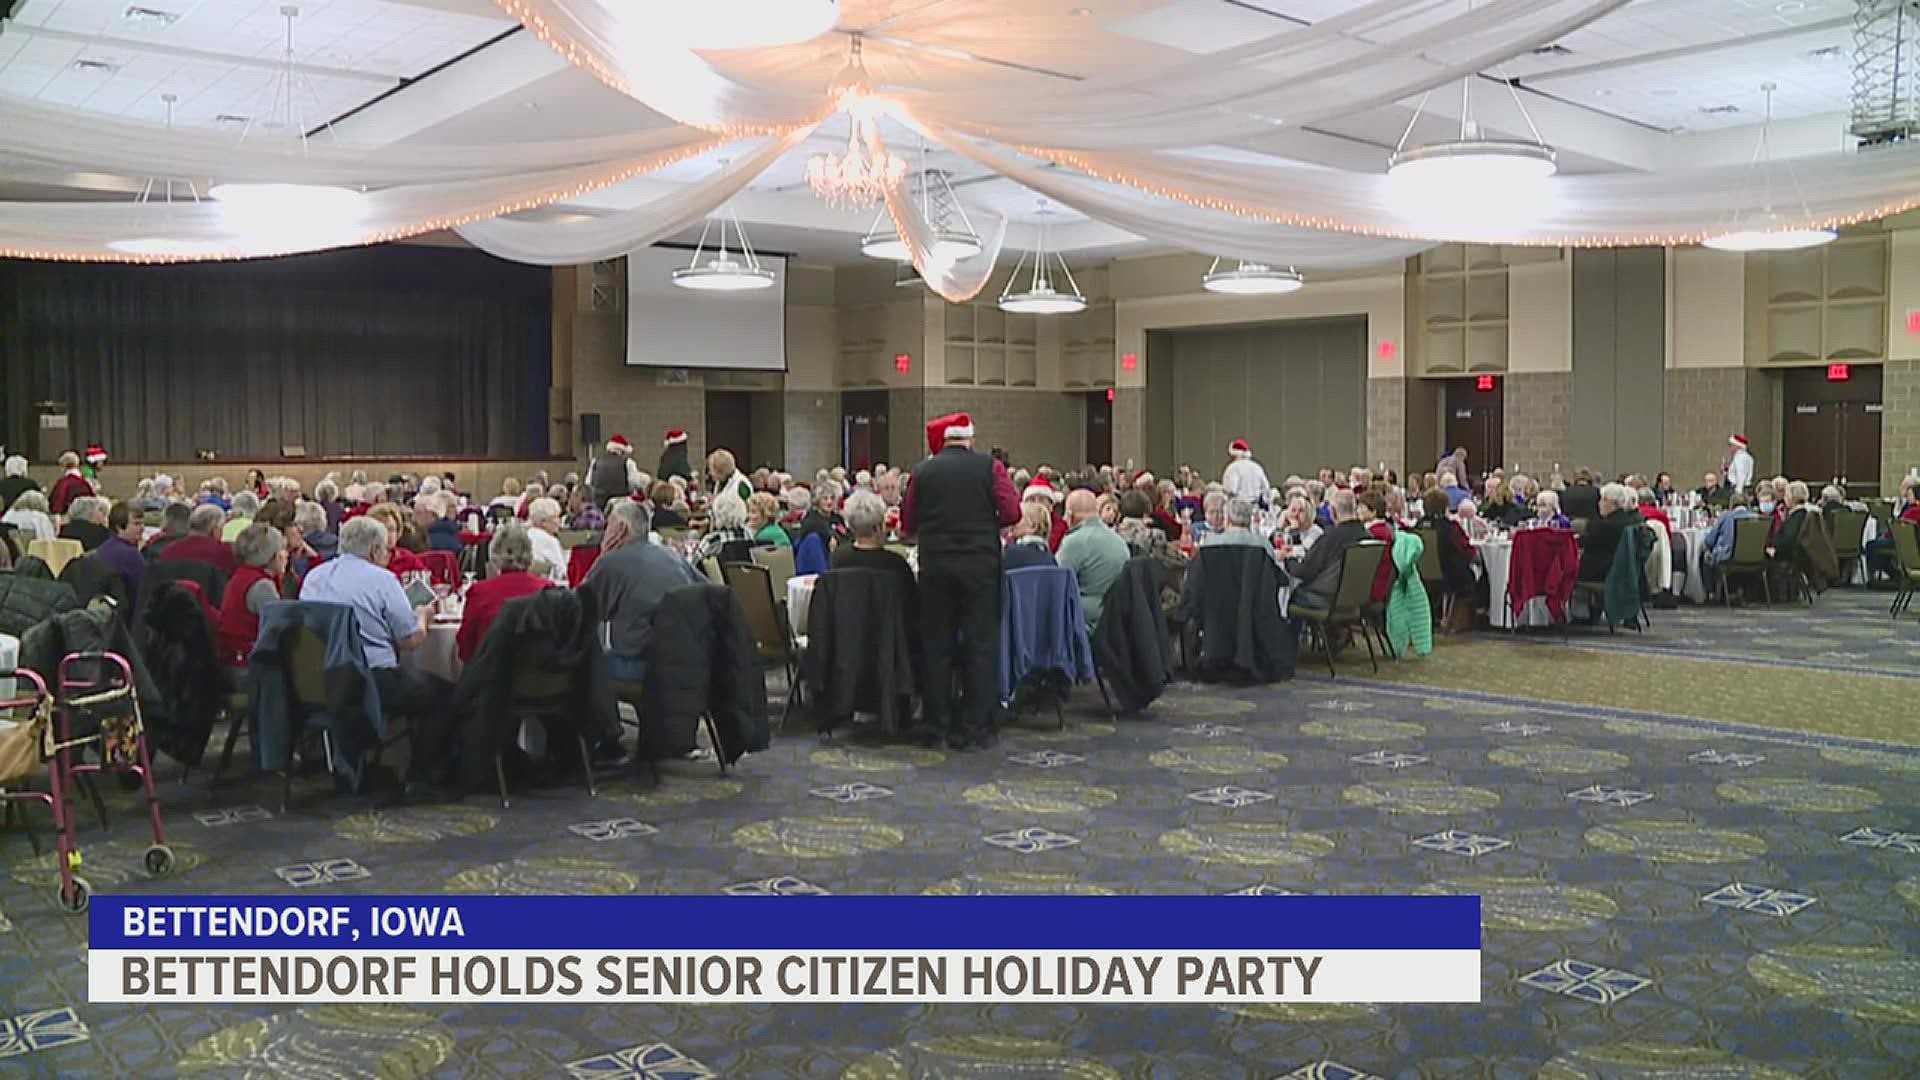 It was the 12th year that the city of Bettendorf has held its 'Tis the season senior holiday celebration.